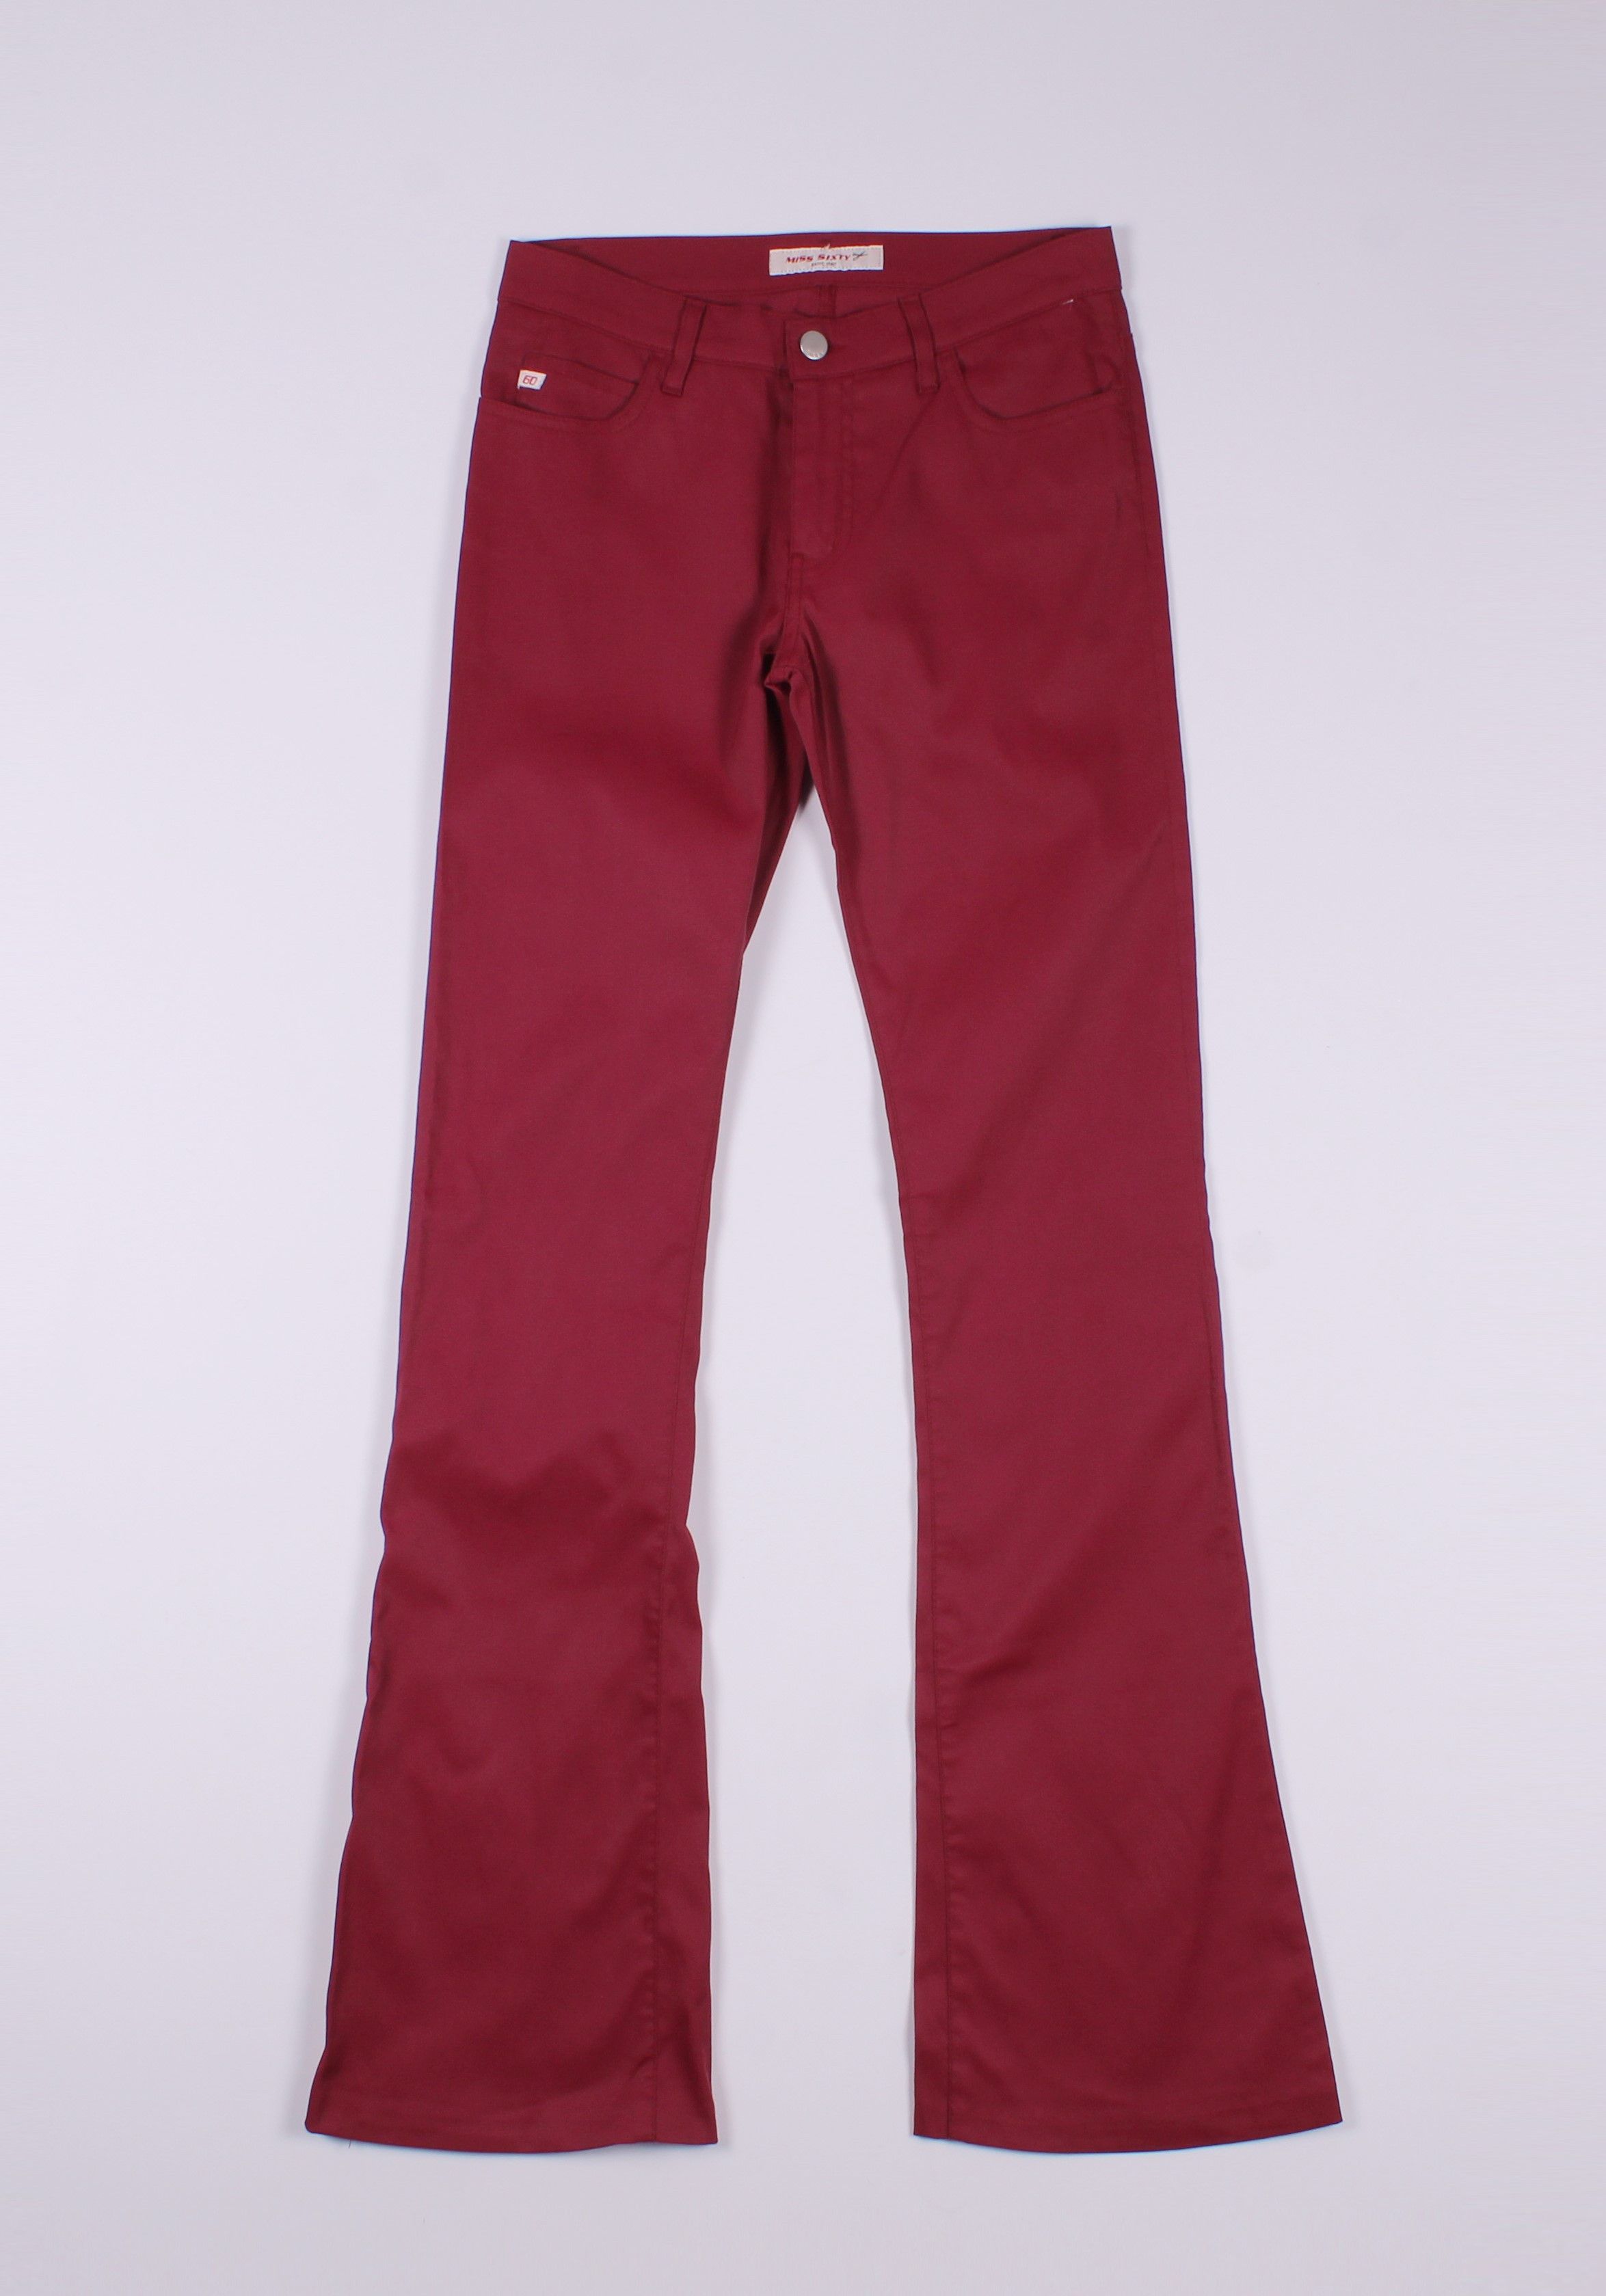 Miss Sixty Vintage Miss Sixty Y2K Wide Leg Red Pants Trousers | Grailed